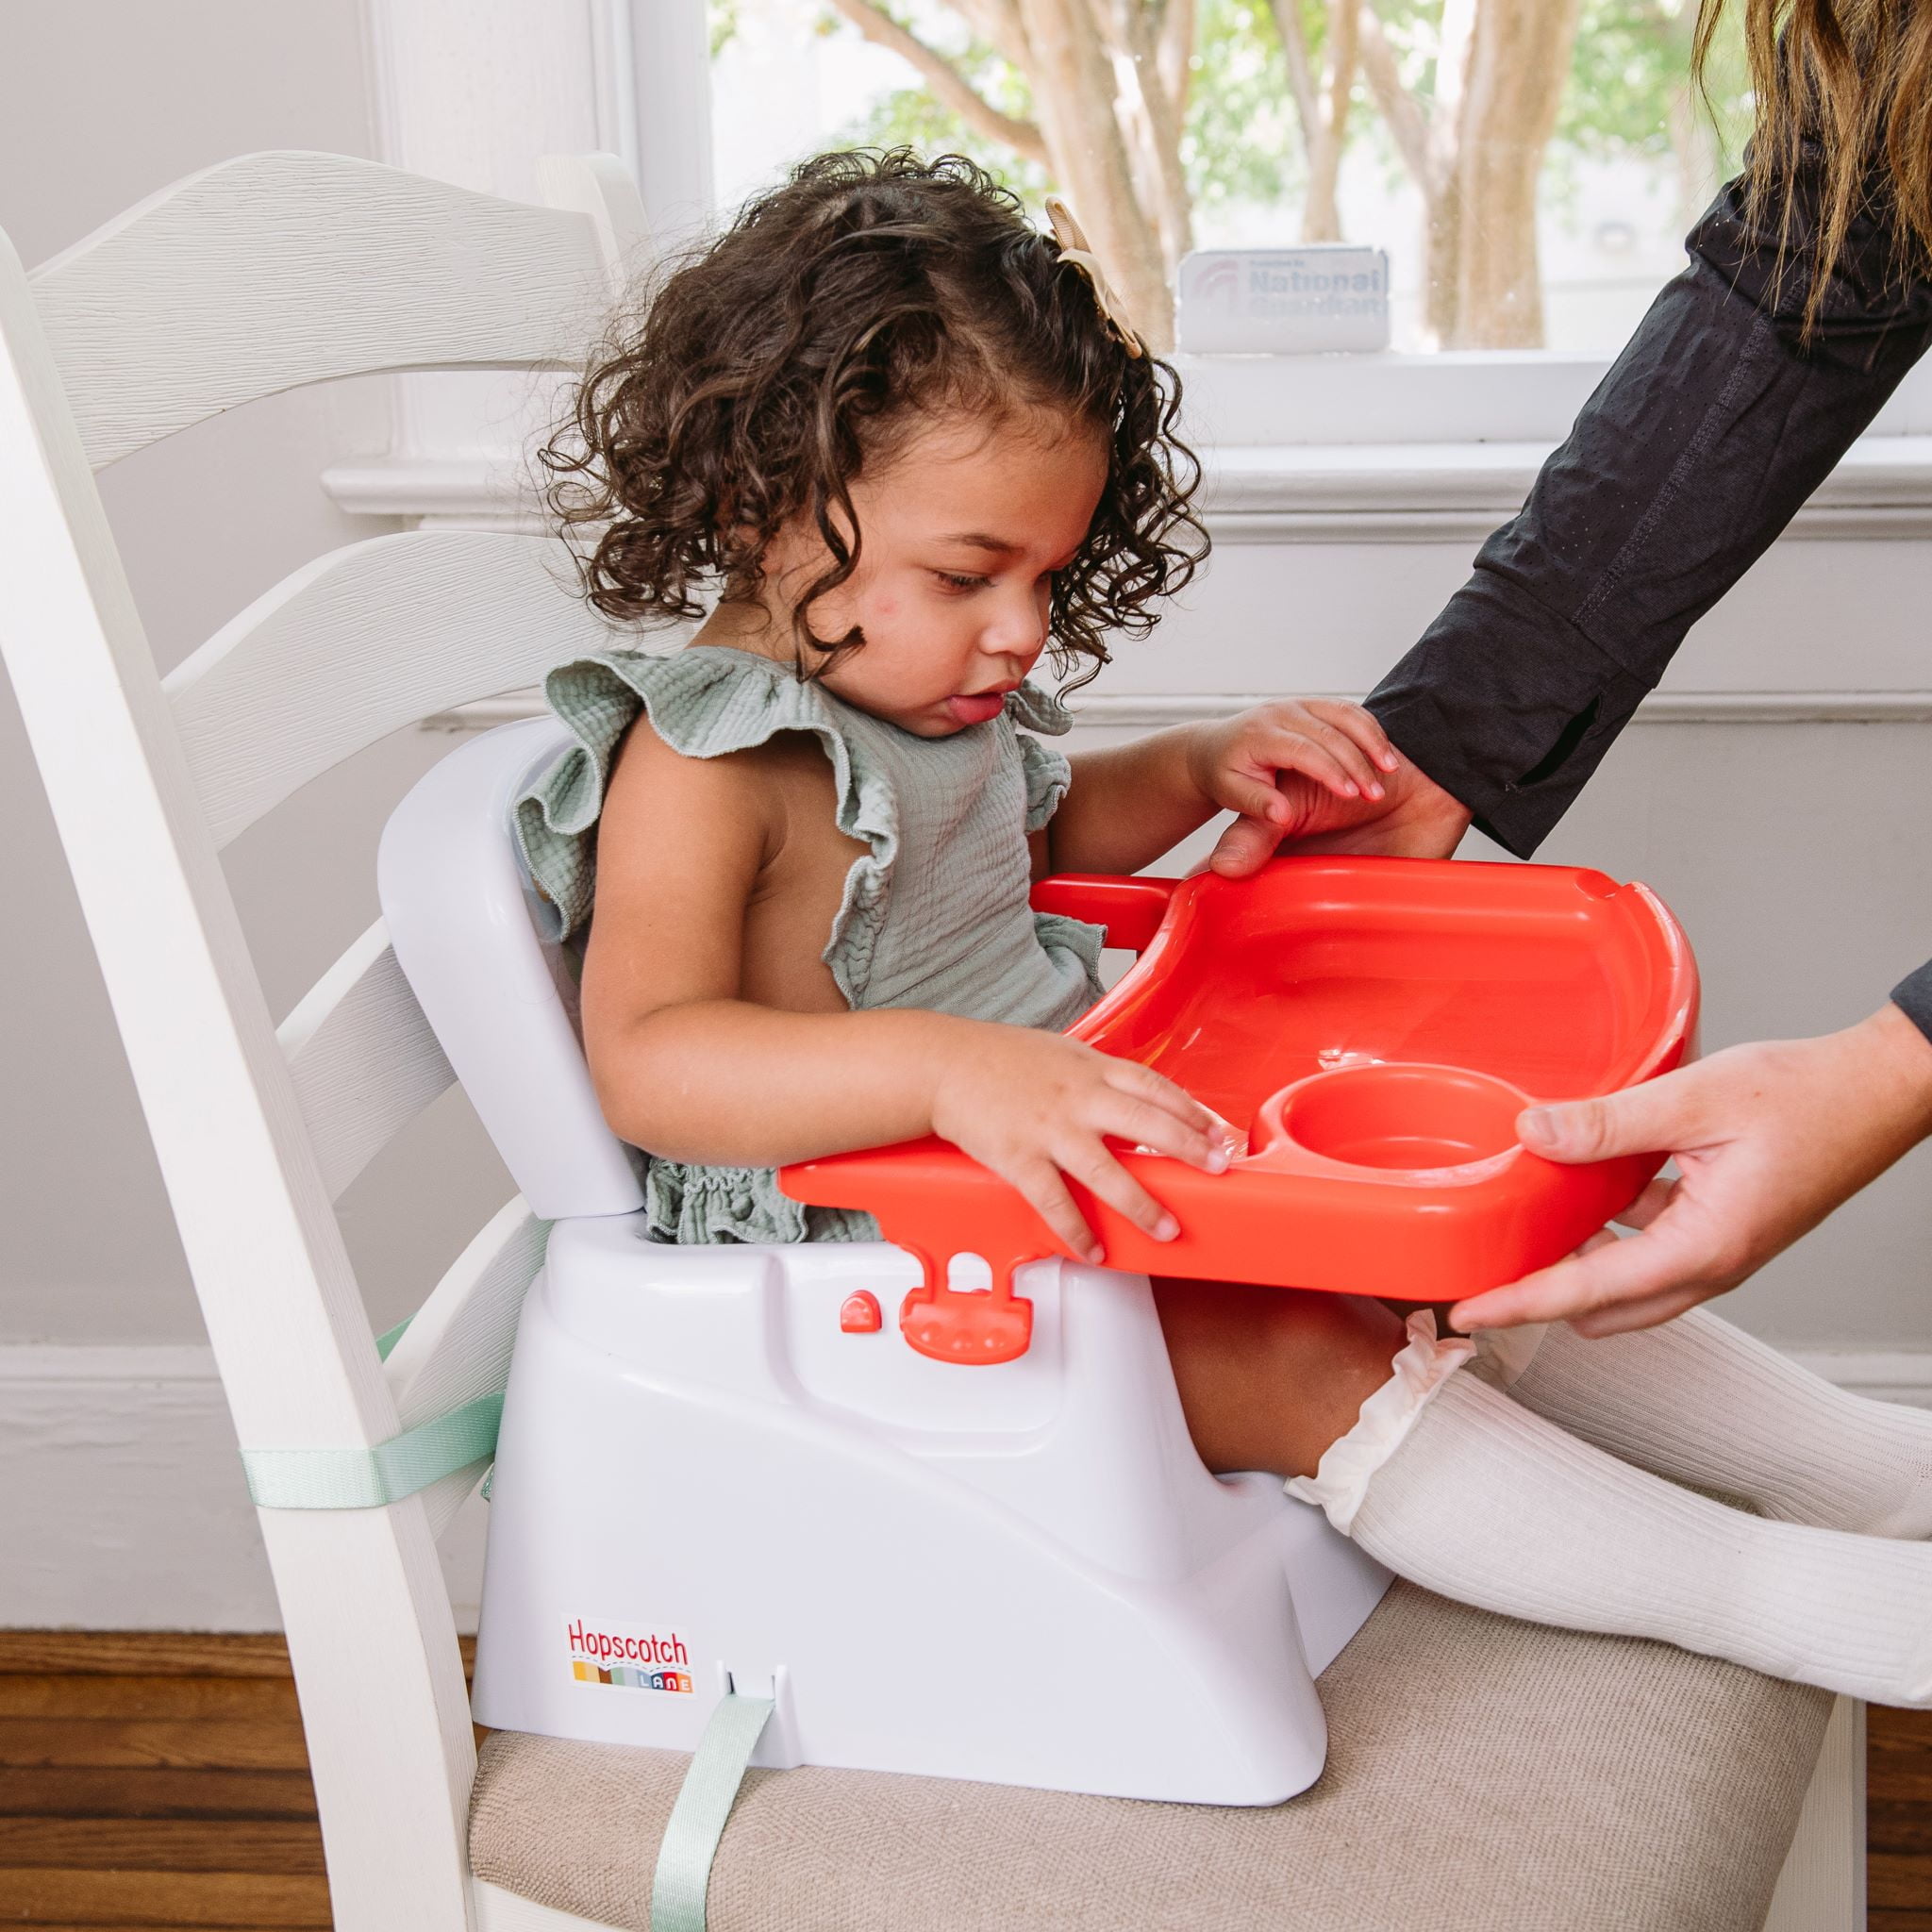 Dropship Hopscotch Lane Booster Seat & Tray, Baby And Toddler, 6 Months +  to Sell Online at a Lower Price